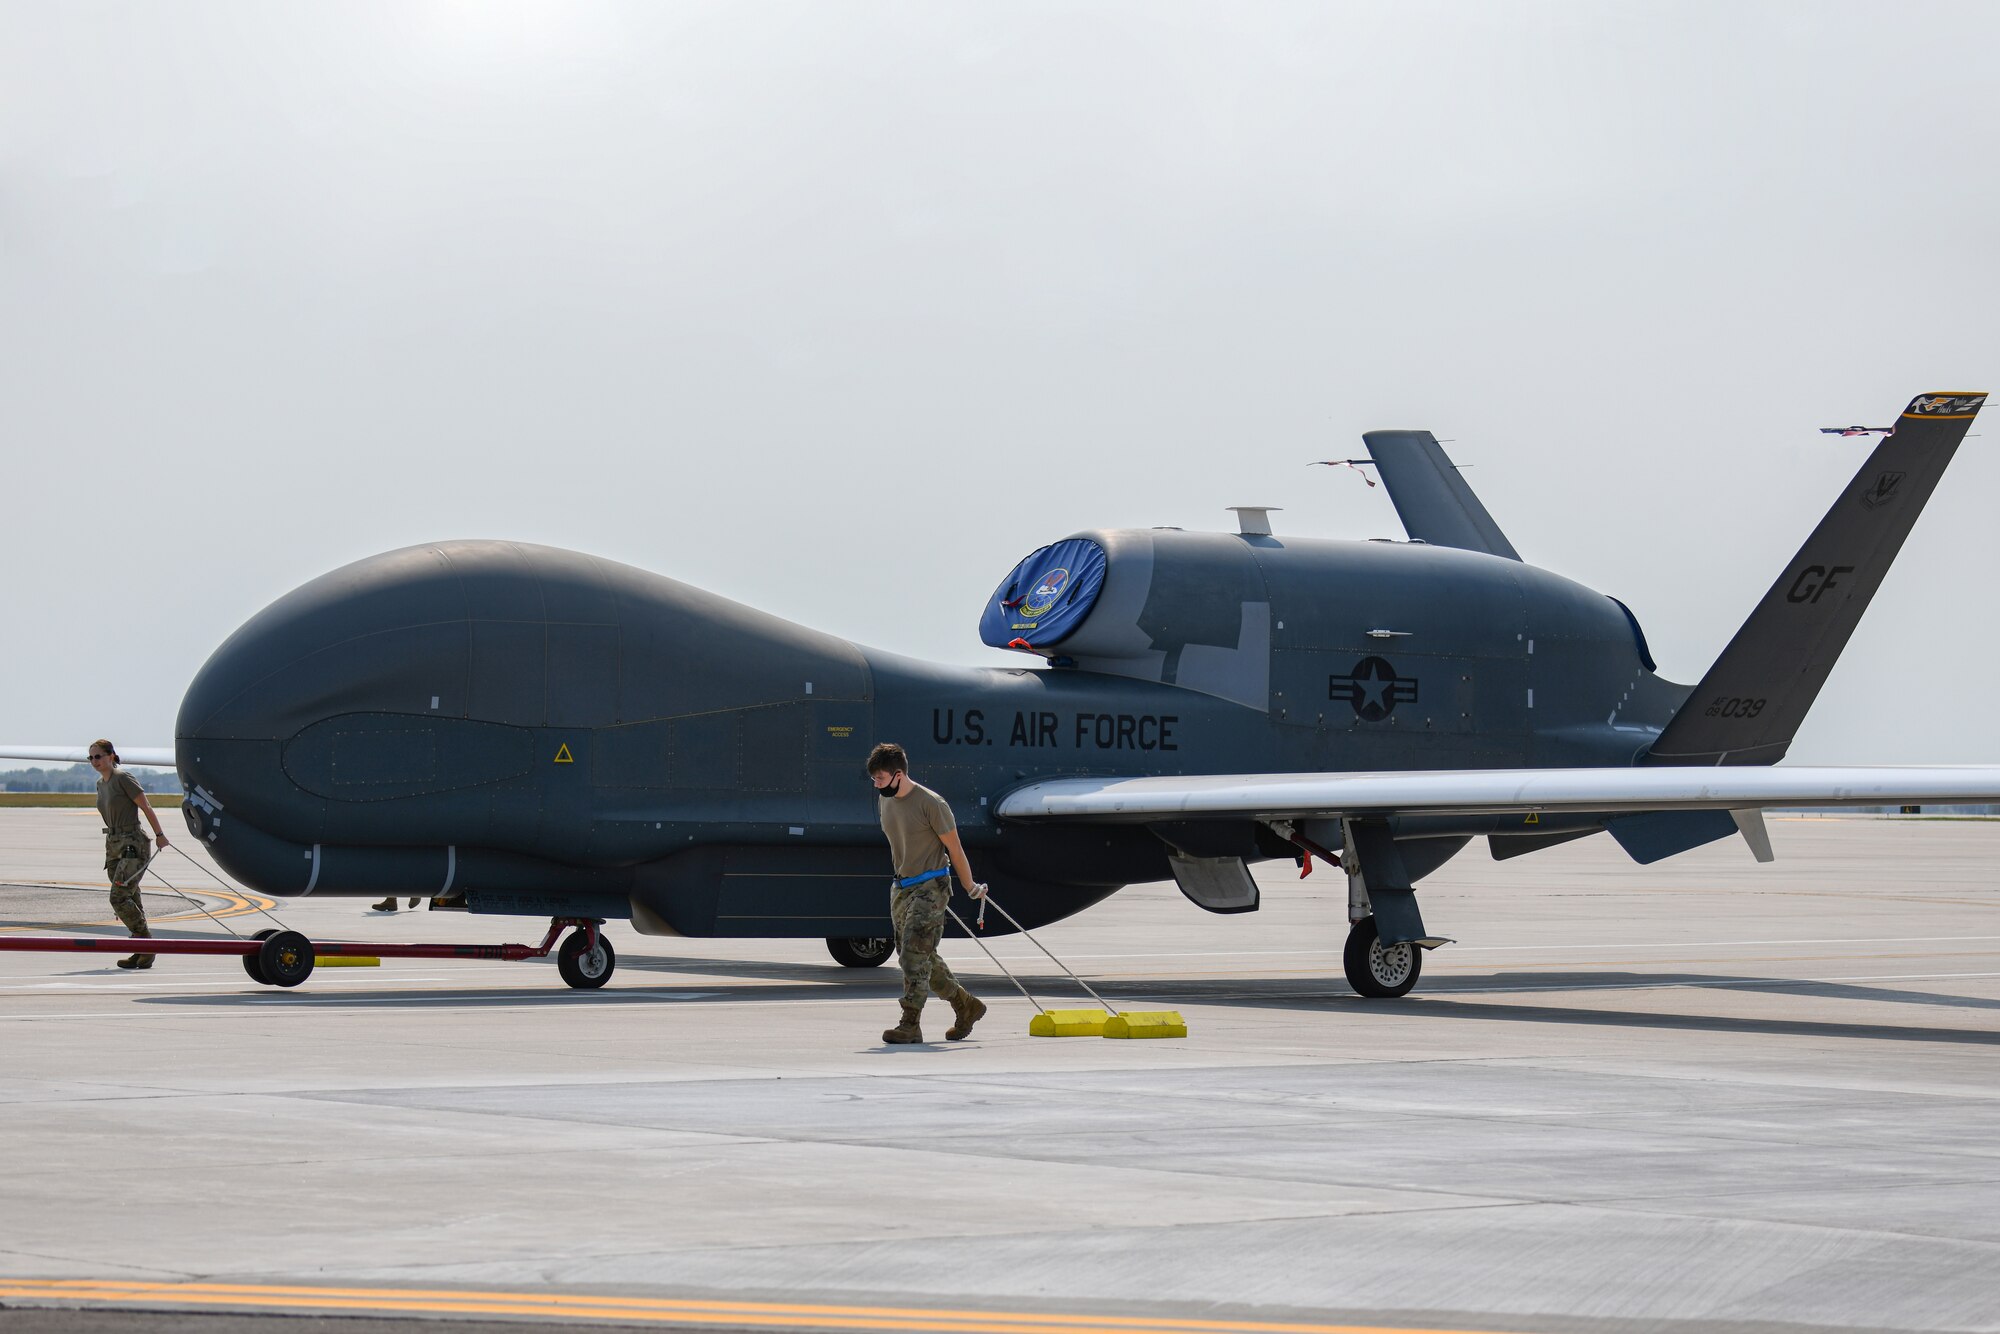 Crew chiefs assigned to the 319th Aircraft Maintenance Squadron, pull chocks beside an RQ-4 Global Hawk as it’s towed across the flight line during an exercise on Grand Forks Air Force Base, N.D., Aug. 19, 2021. The primary goal of this exercise was to accelerate change in the RQ-4 enterprise and to prove the Global Hawks can meet demands of the Agile Concept Employment concept for future operations. (U.S. Air Force photo by Airman 1st Class Ashley Richards)